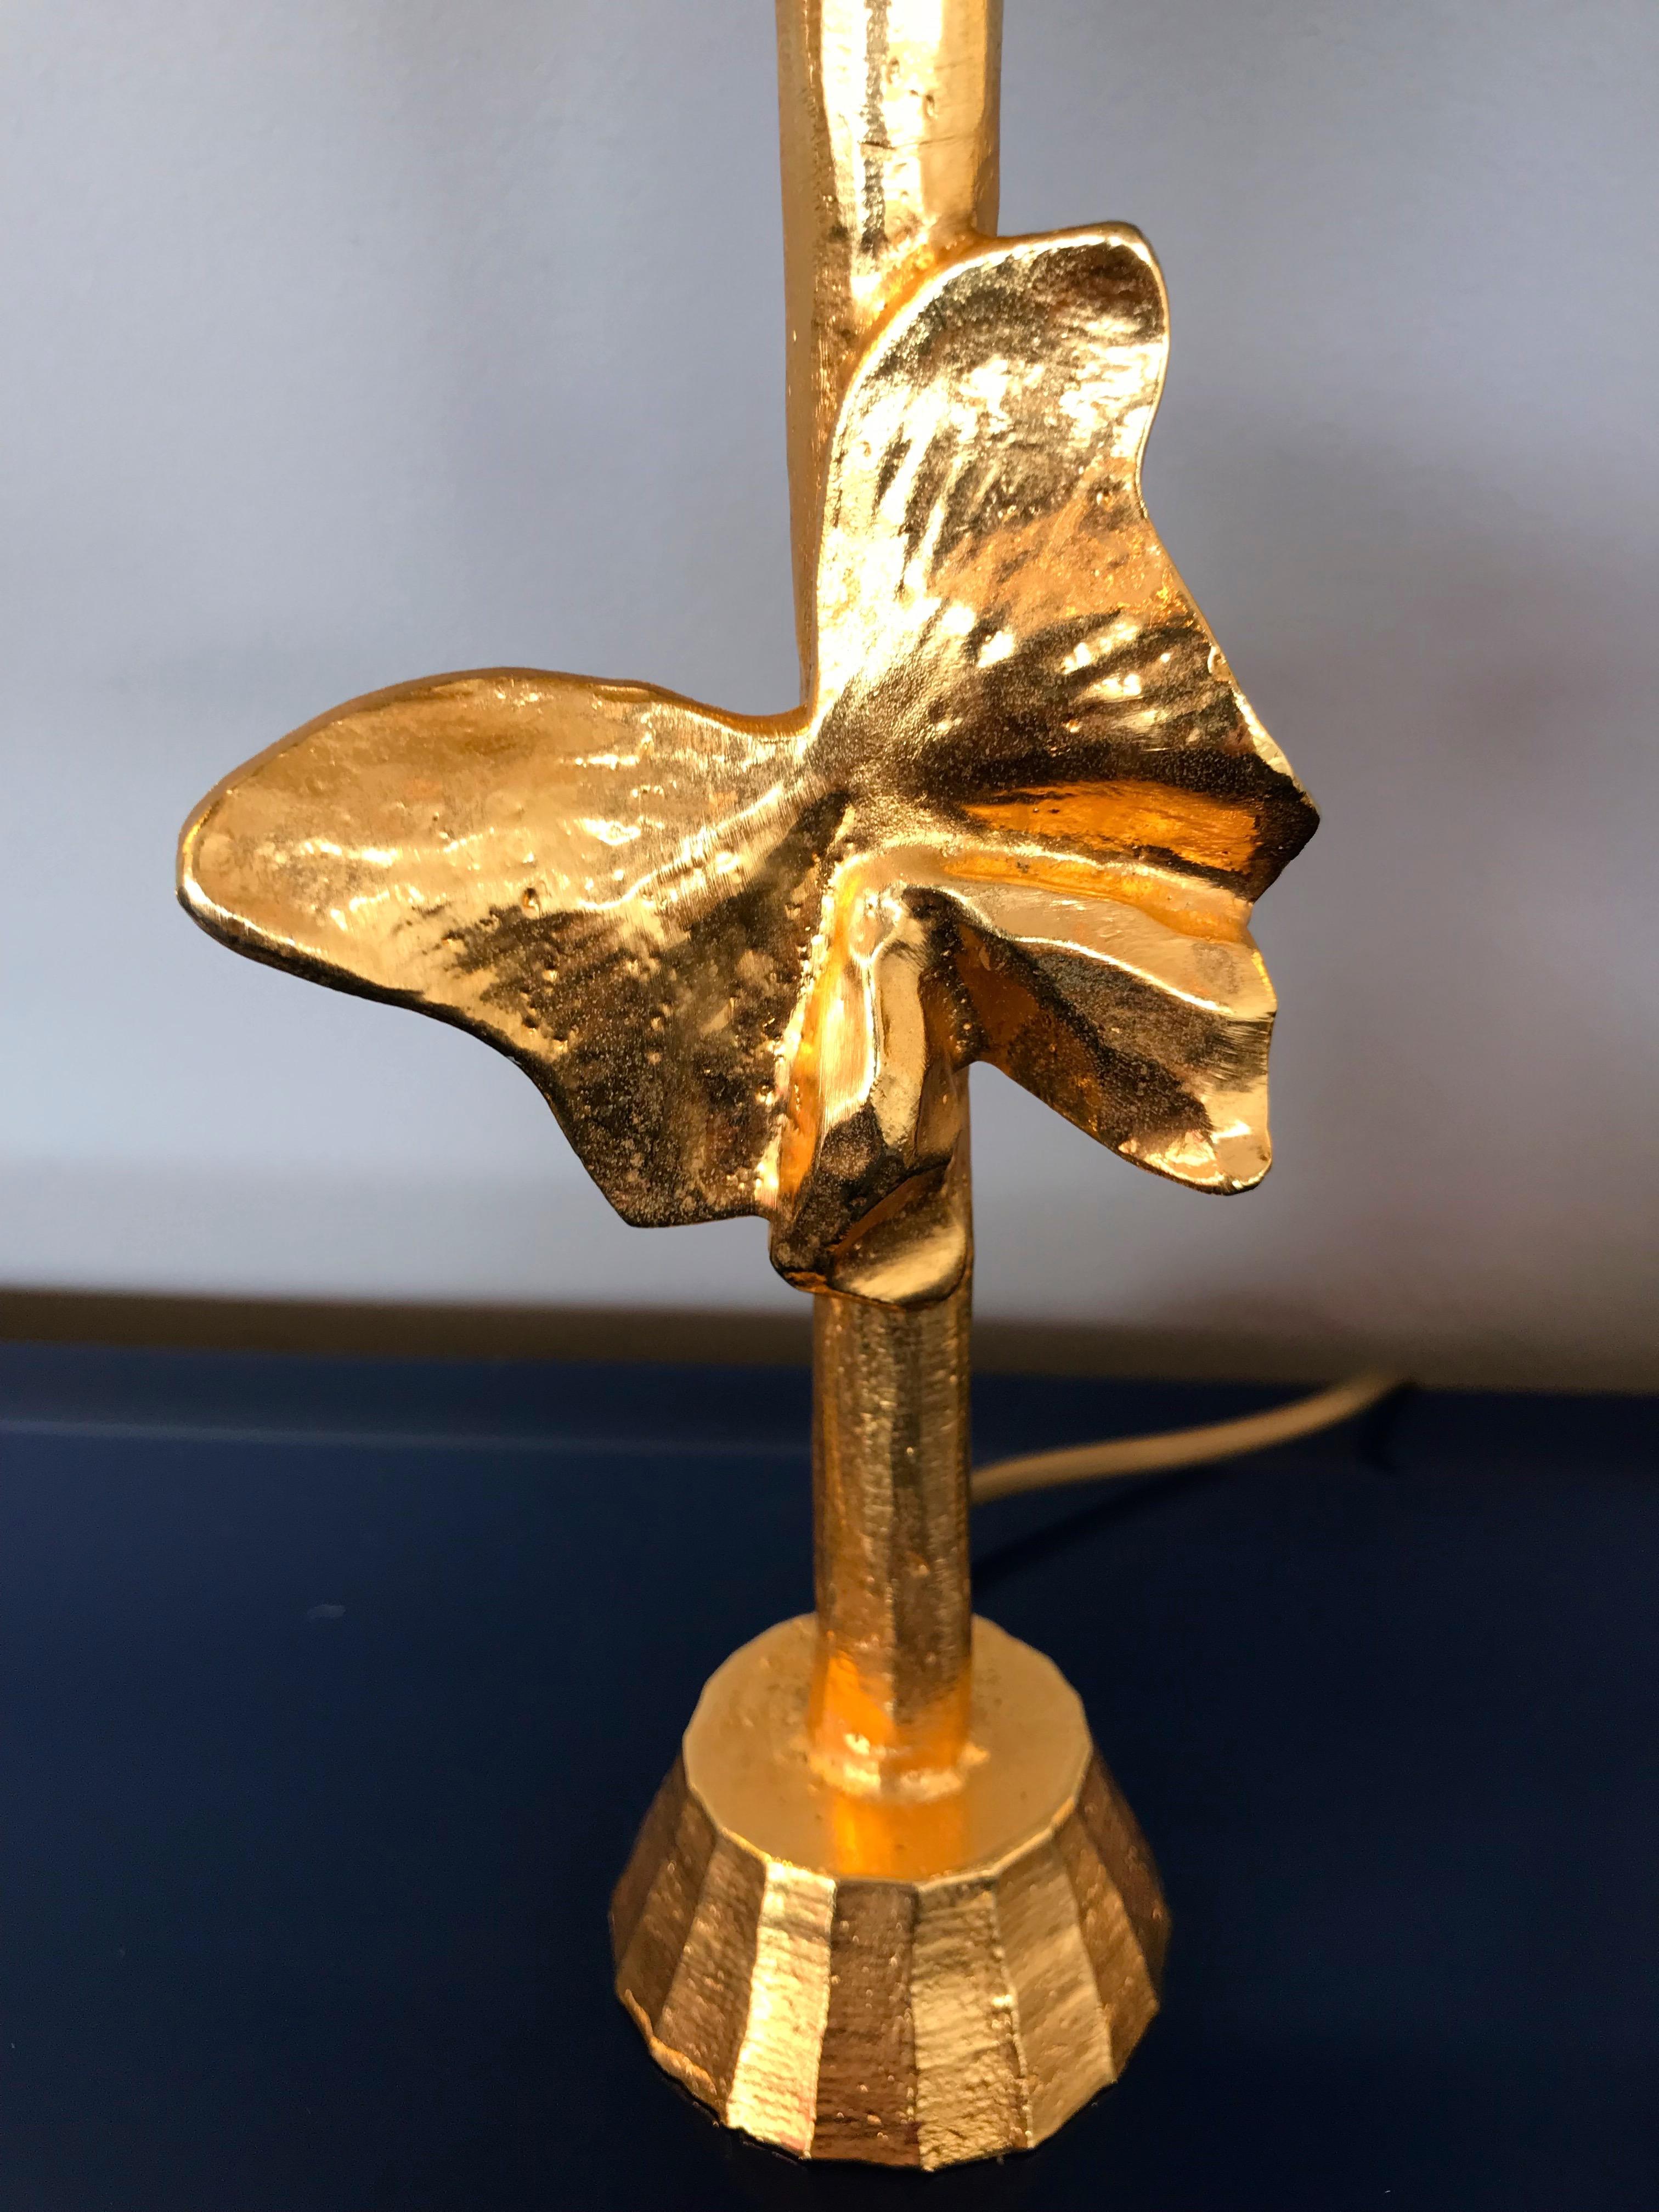 Pair of butterfly bedside or table lamps by the foundry Fondica. Hammered gilt bronze metal style, great quality very artistical work. No more production today. Some Famous designer who have worked for Fondica are Pierre Casenove, Mathias, Nicolas